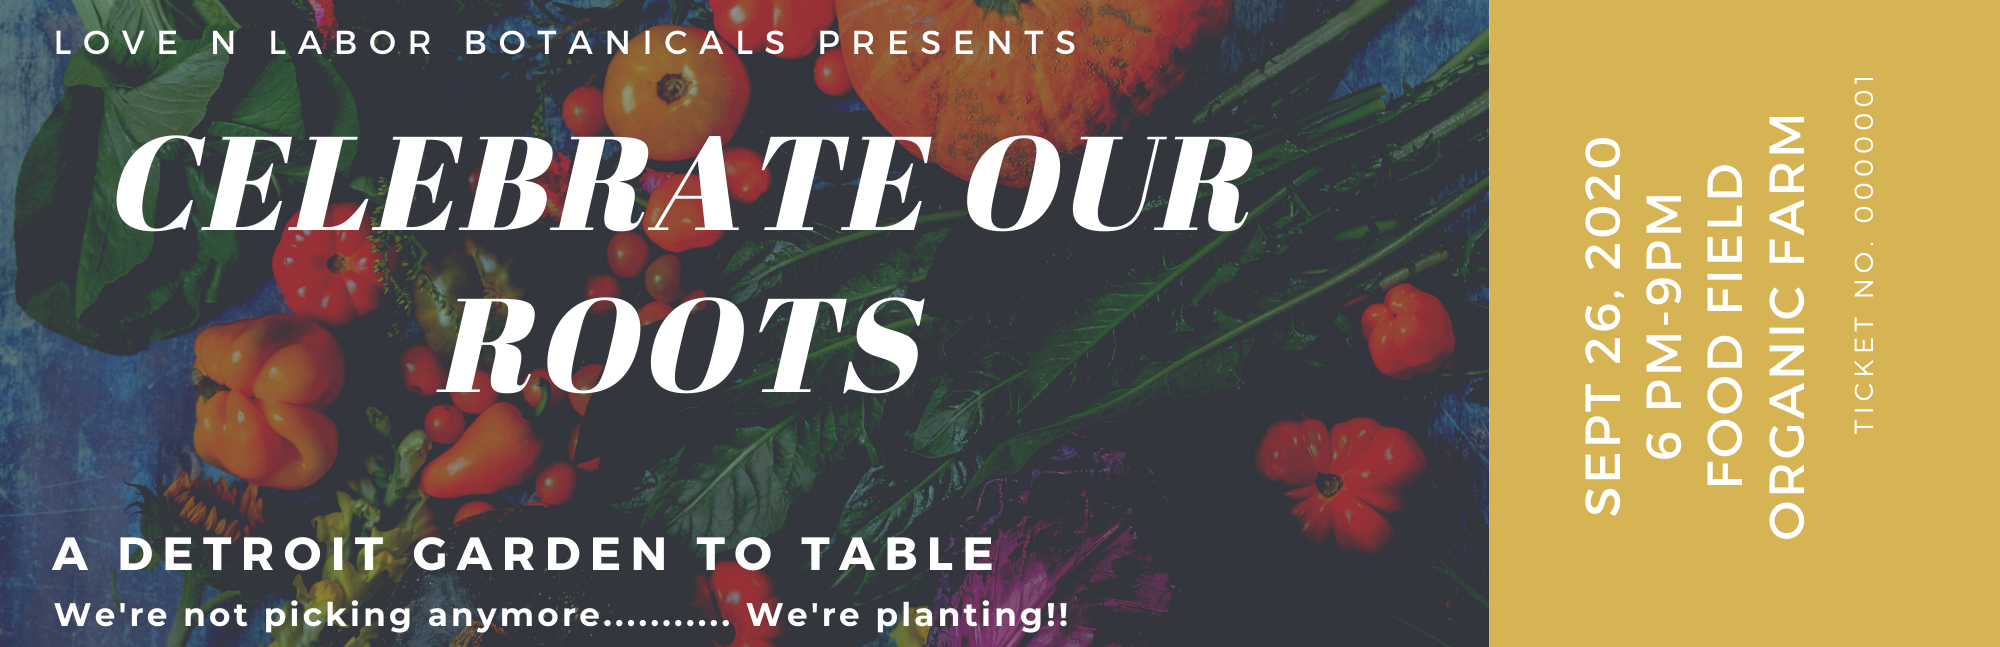 Celebrate Our Roots: A Detroit Garden to Table